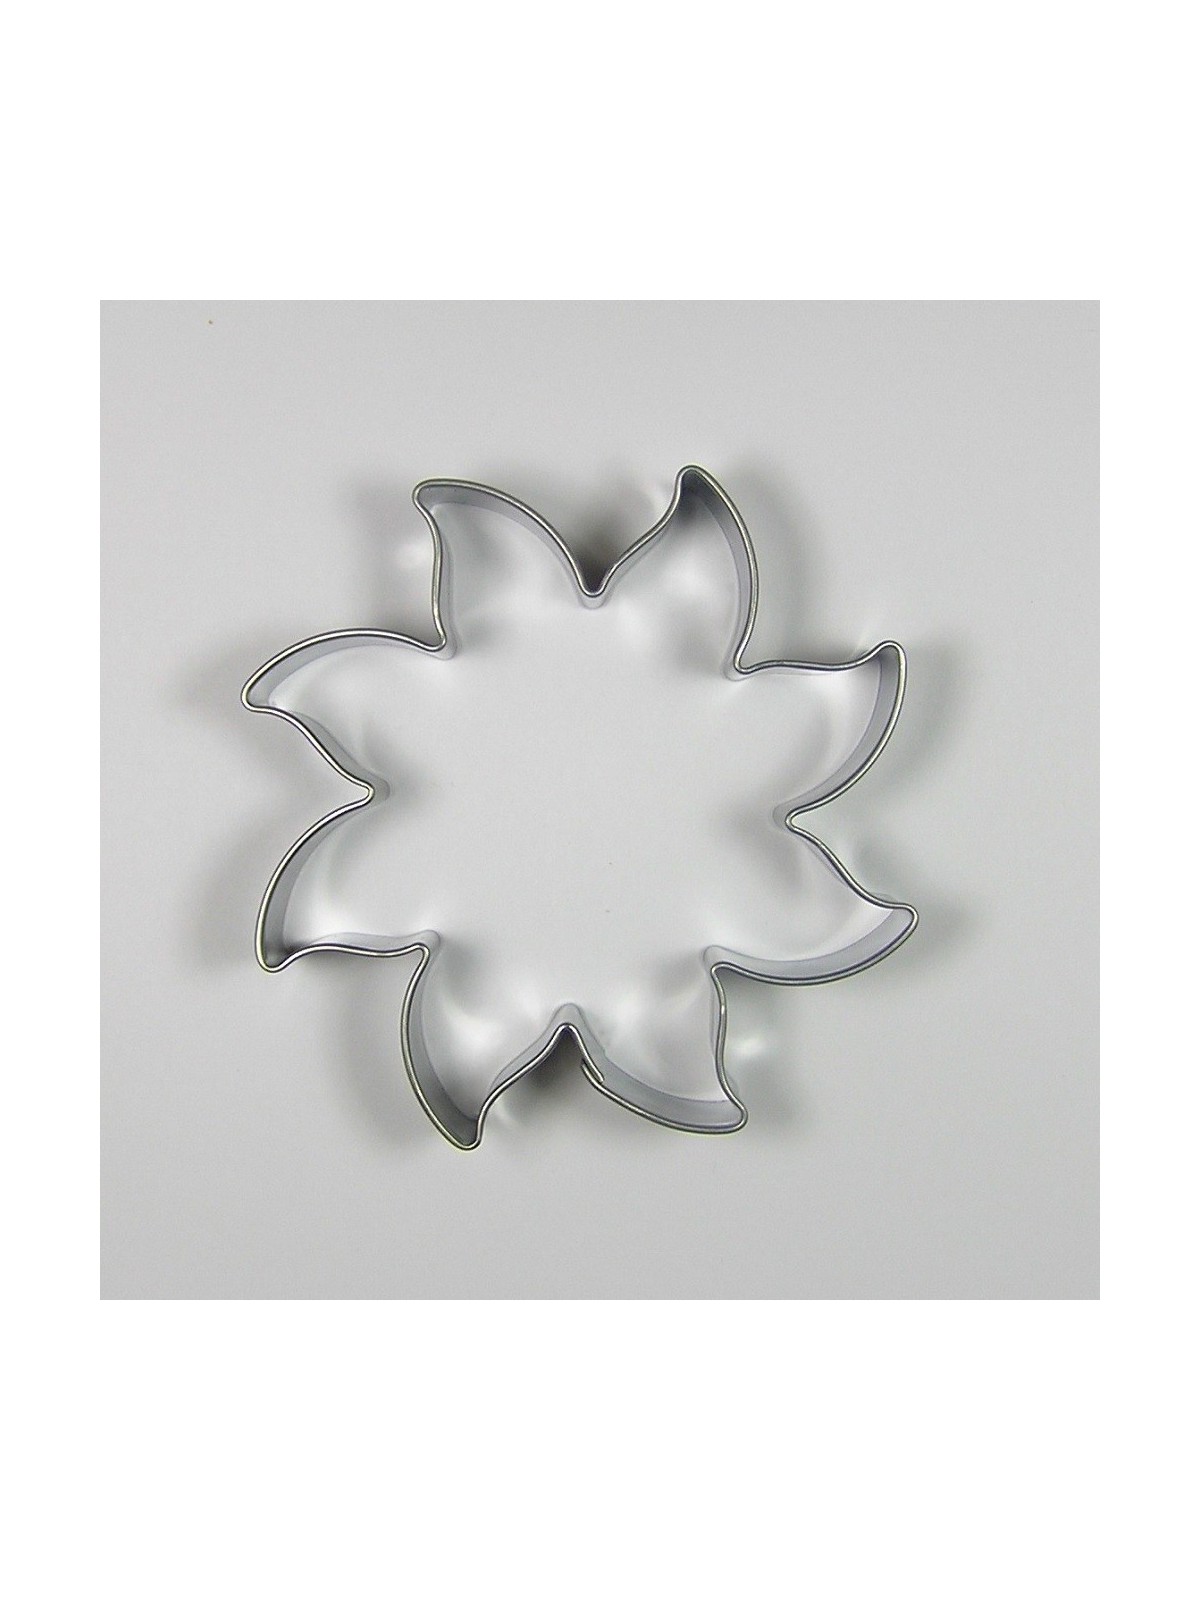 Stainless steel cookie cutter - sun large 7cm